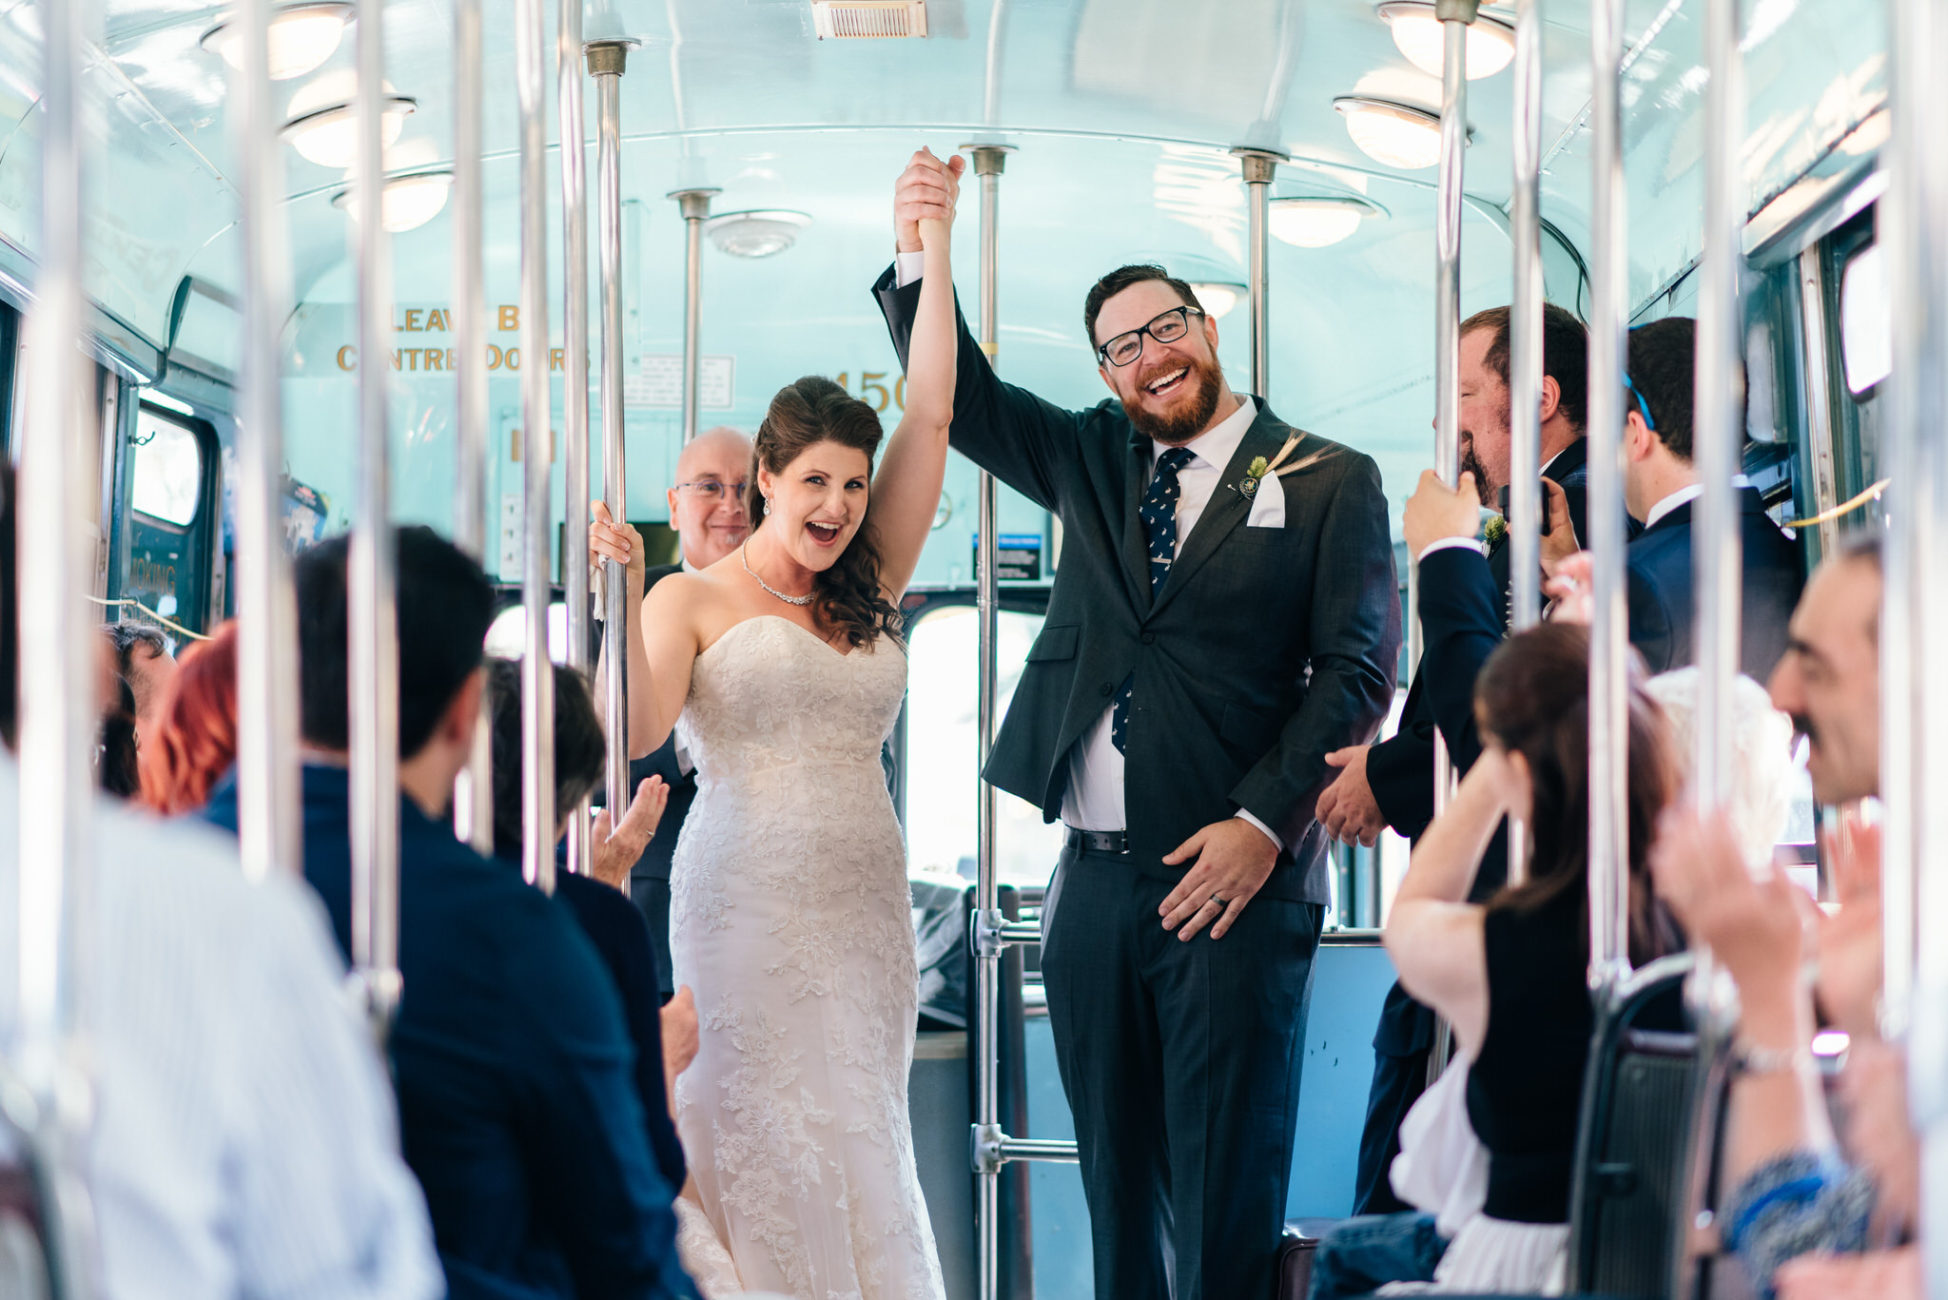 The bride and groom hold their hands in the air in celebration after their Vintage Toronto Streetcar Wedding Ceremony